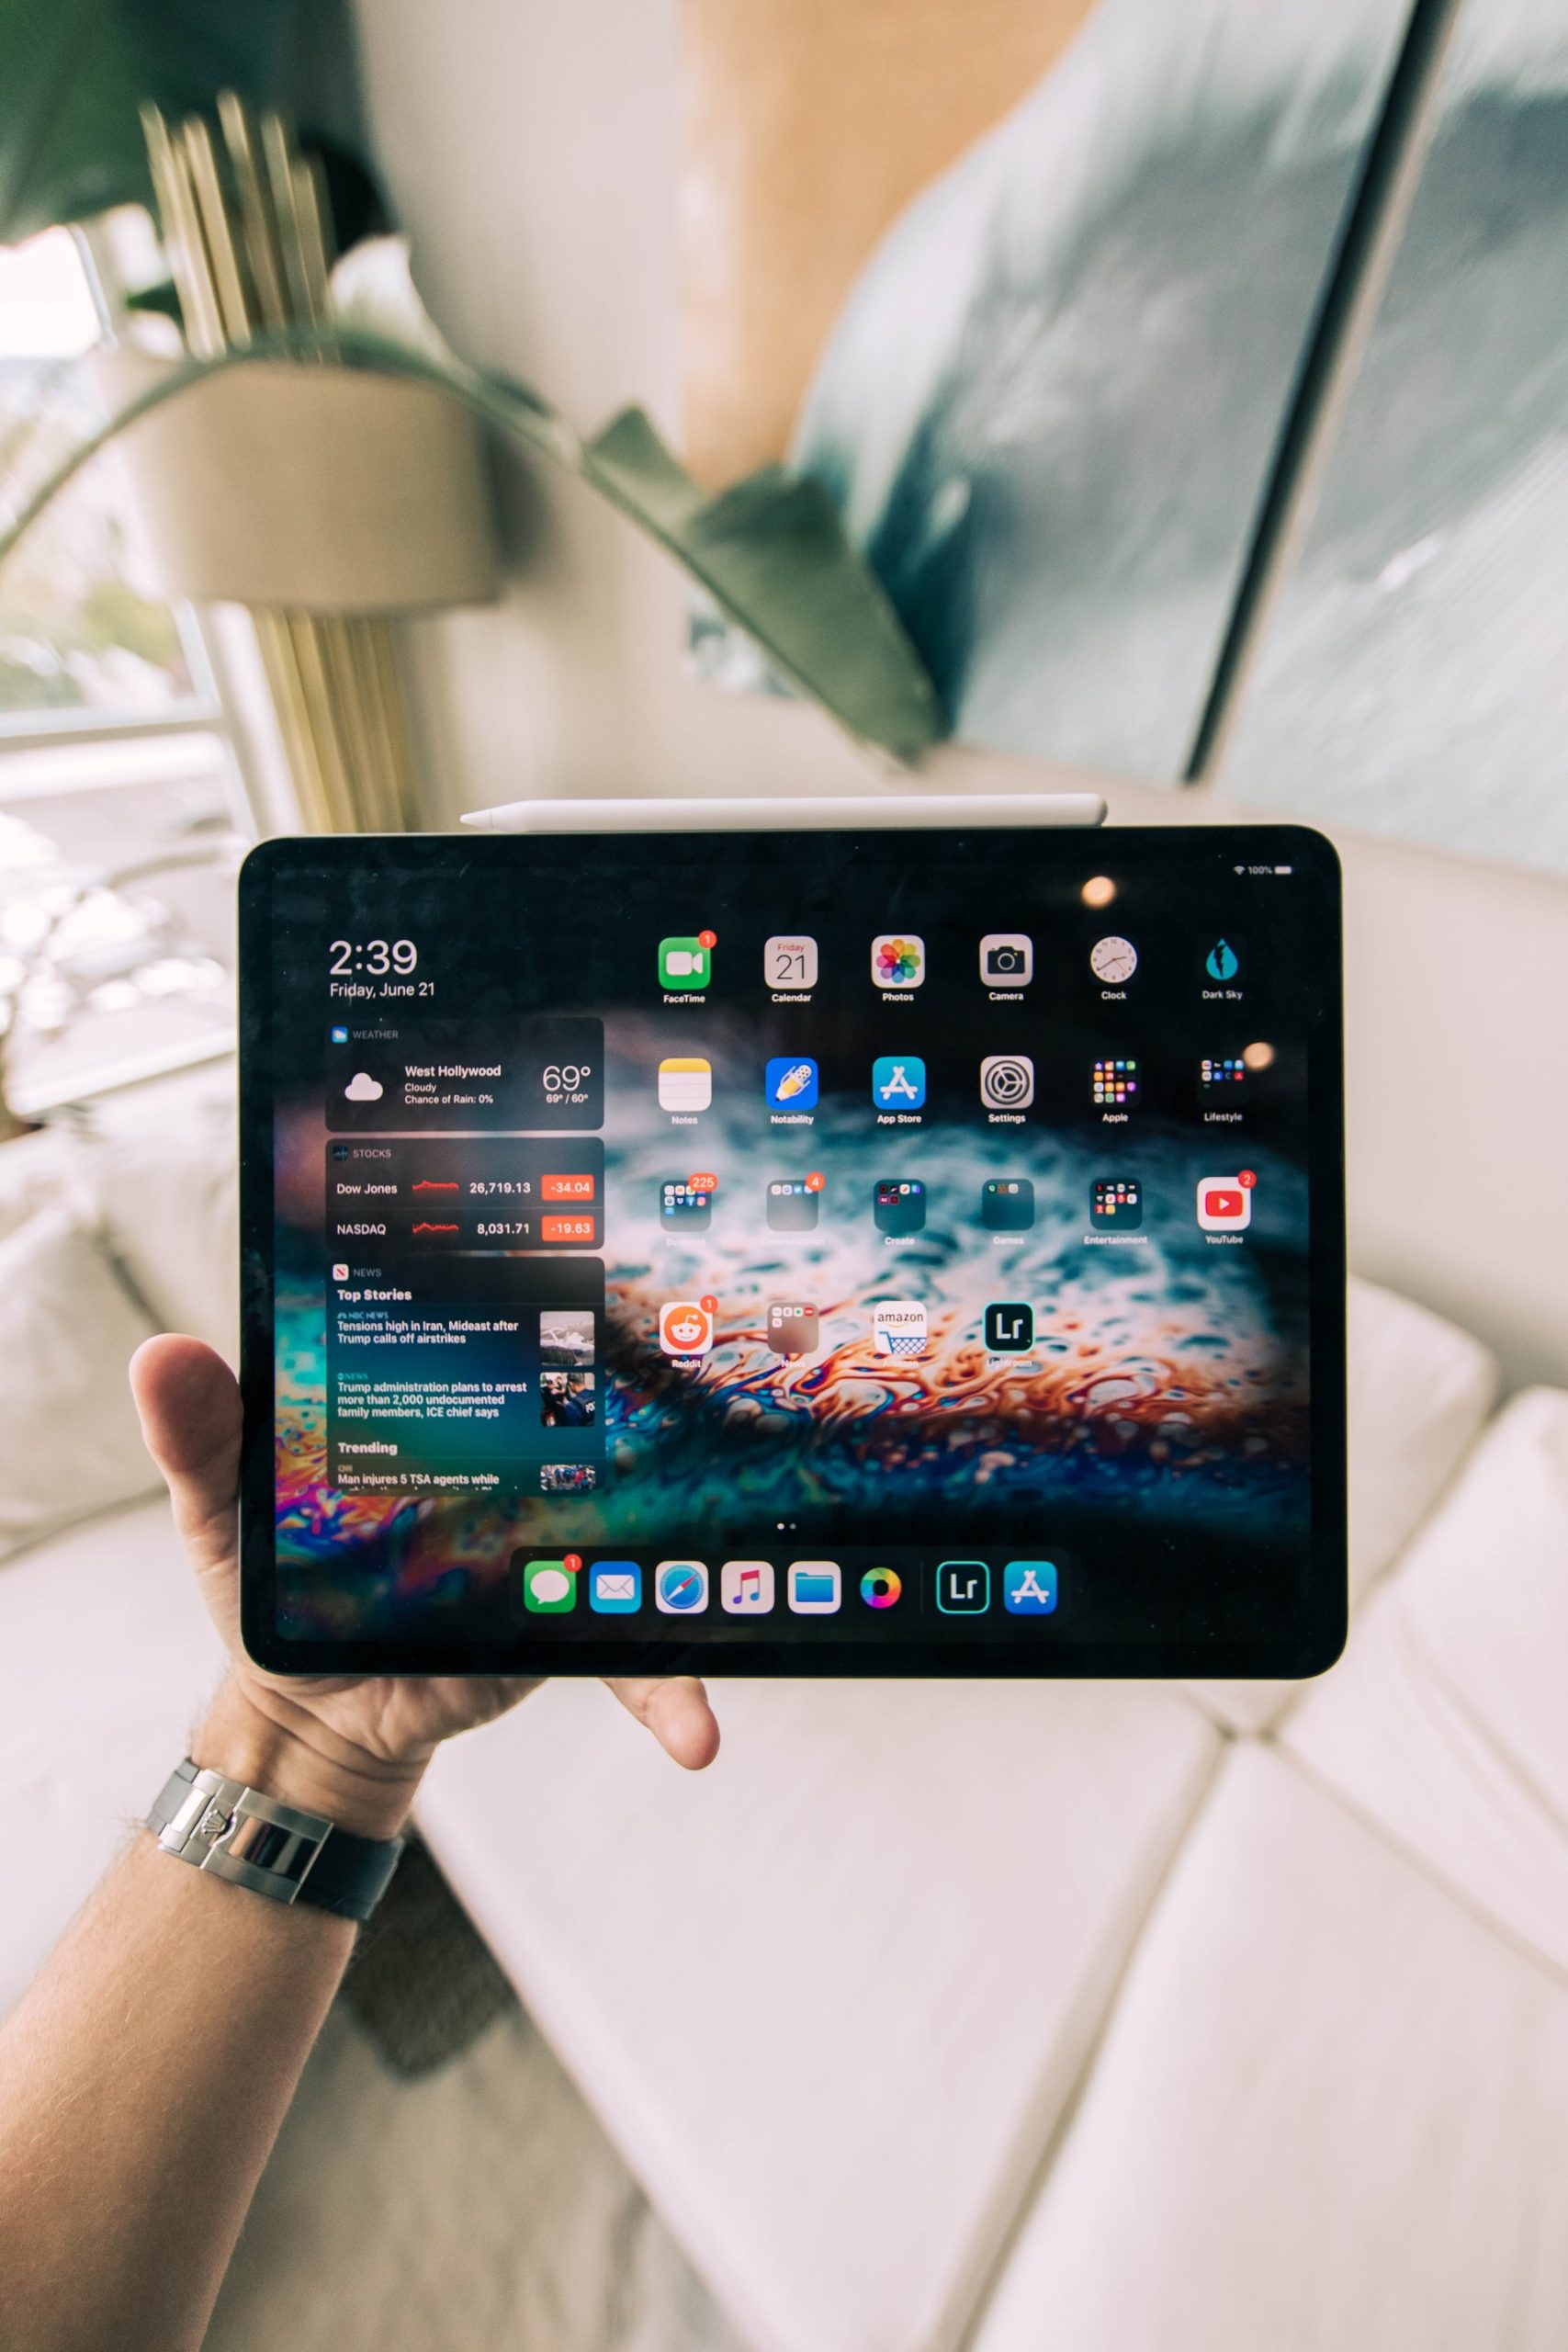 How To Disconnect Ipad From Iphone